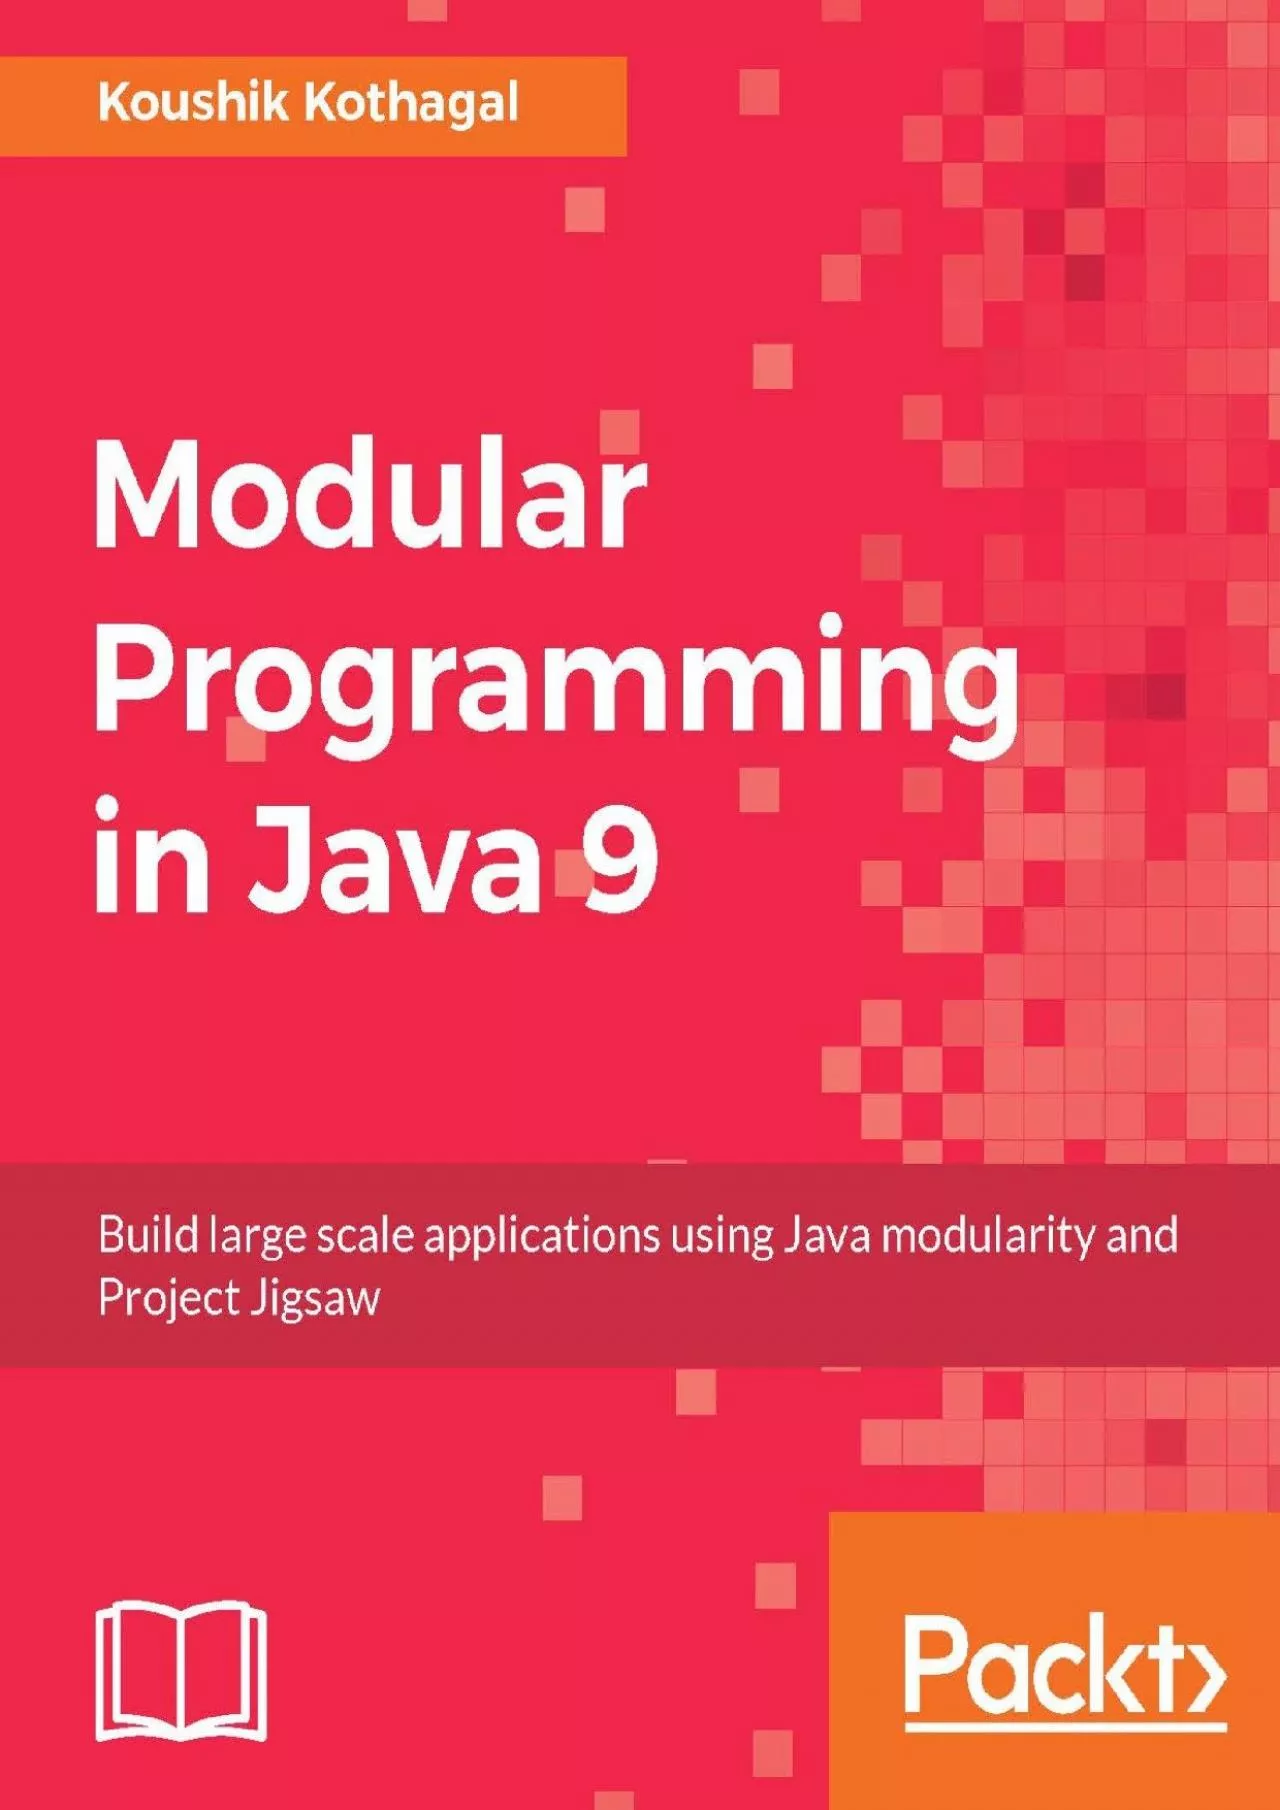 [BEST]-Modular Programming in Java 9 Build large scale applications using Java modularity